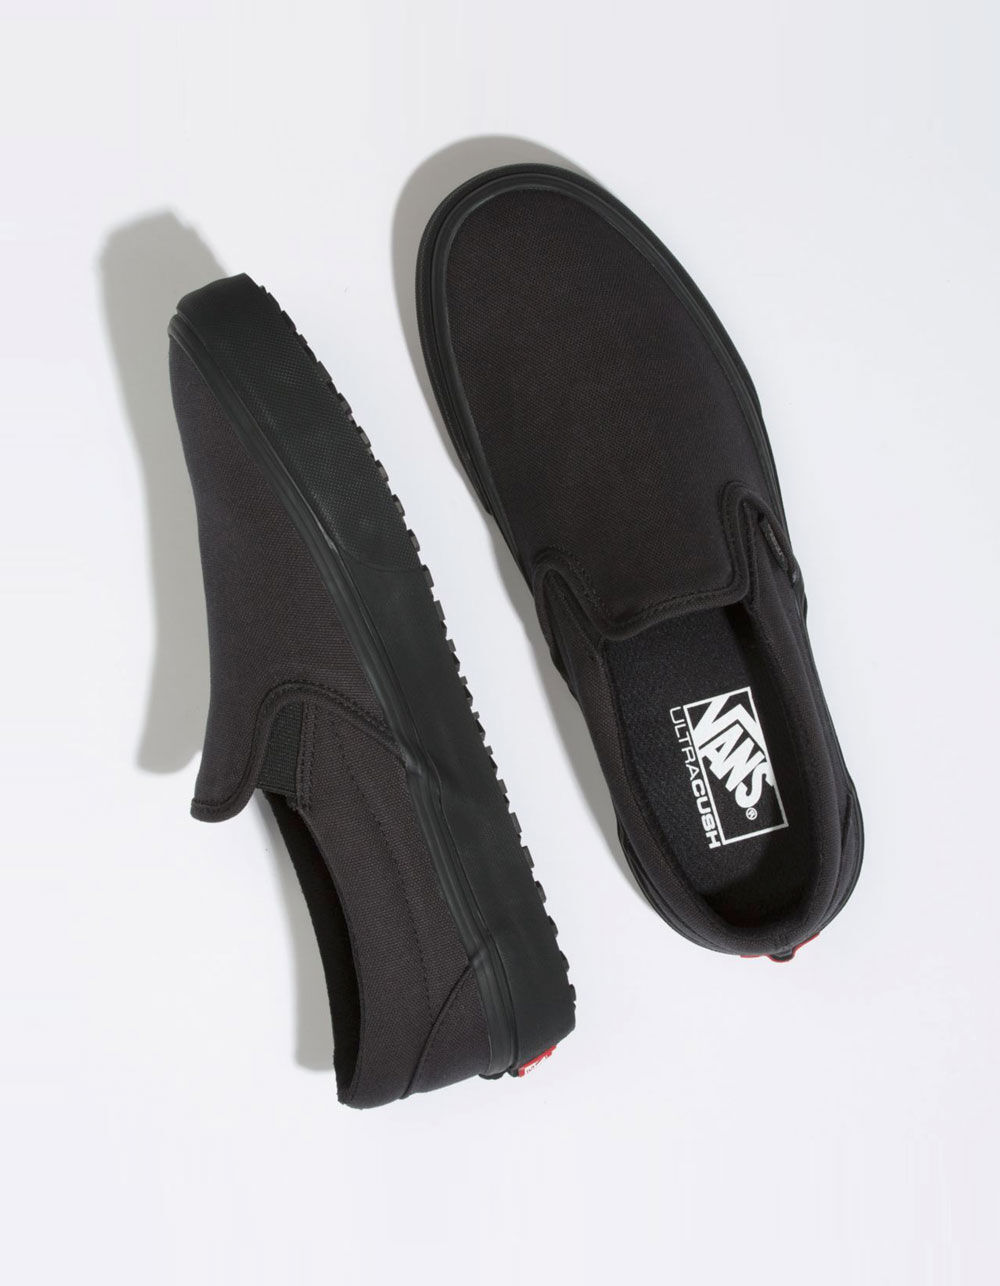 VANS Made For The Makers Classic Slip-On Black & Black Shoes - BLACK ...